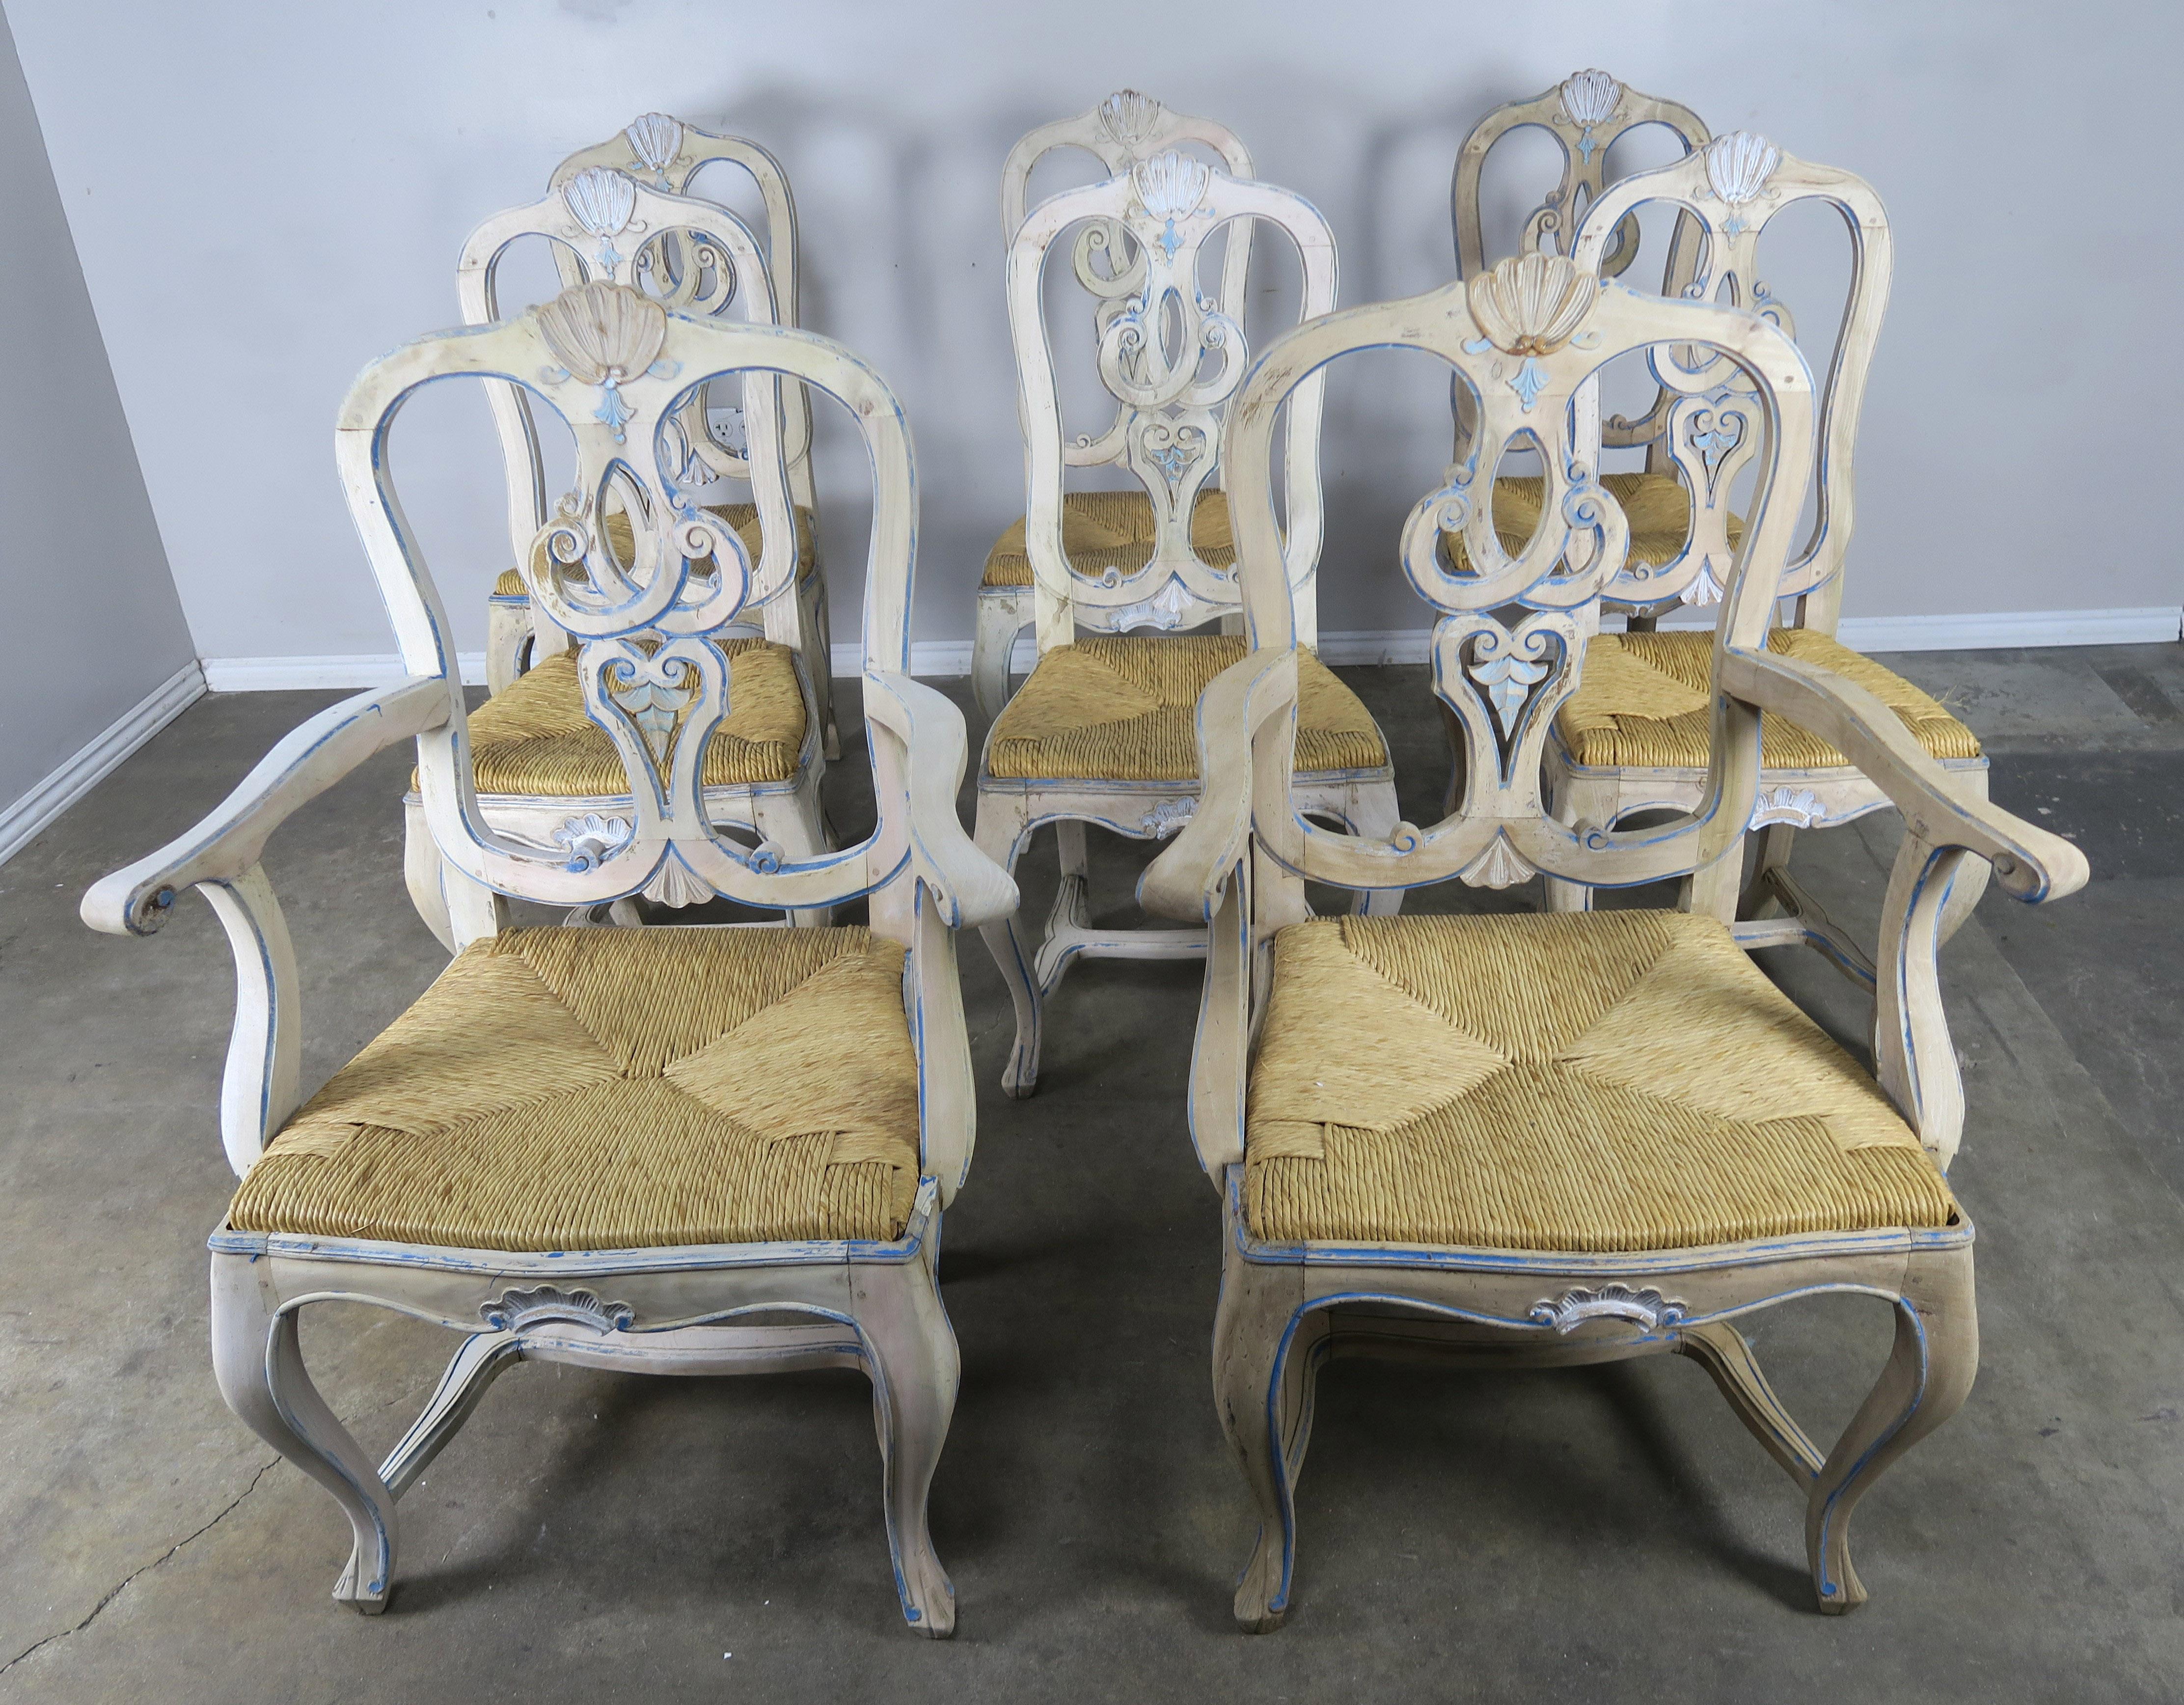 Set of (8) French country painted dining chairs with rush seats. Beautiful worn, distressed finish with missing paint throughout. Every chair has it's own unique finish and have all distressed a bit differently. Wood is exposed